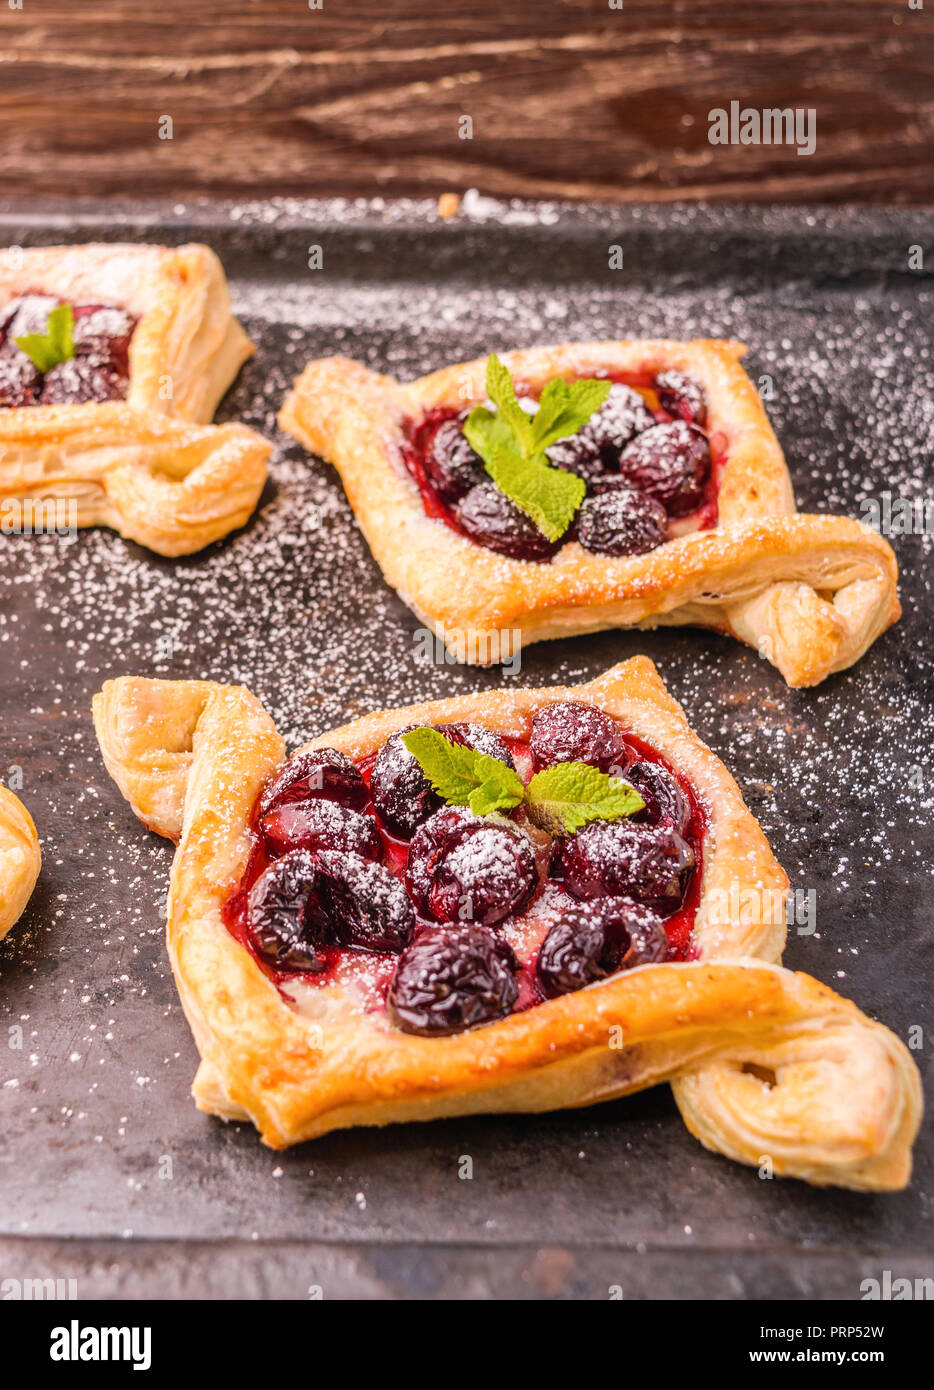 Homemade puff pastry with cherry. Sweet tasty dessert. Decorated with mint leaves. On old black cooking sheet. Stock Photo